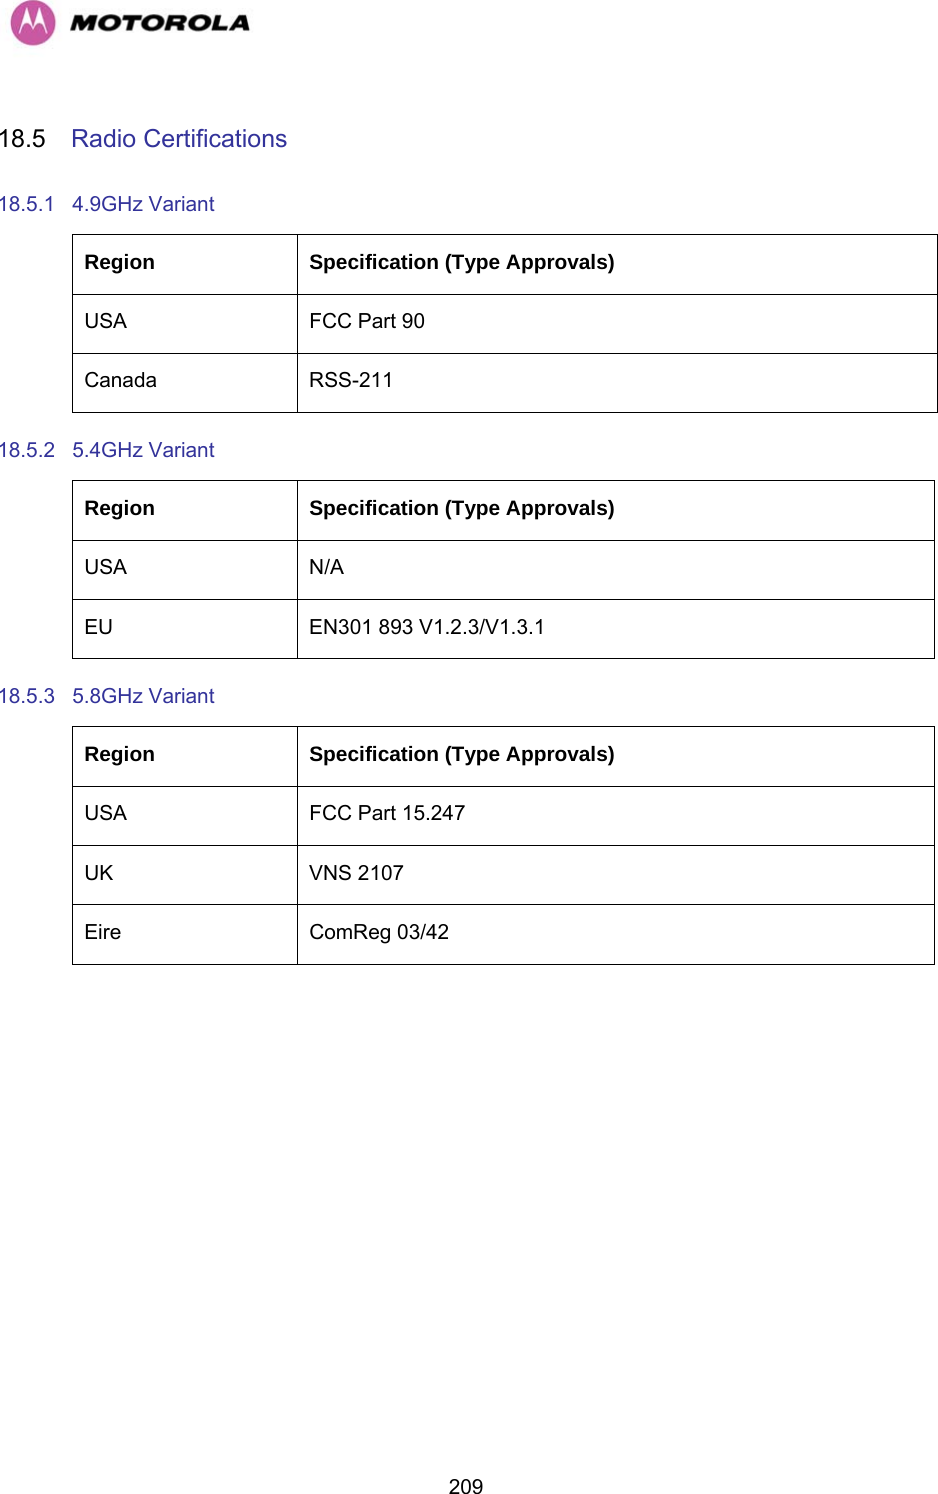   20918.5  Radio Certifications 18.5.1 4.9GHz Variant Region  Specification (Type Approvals) USA  FCC Part 90 Canada RSS-211 18.5.2 5.4GHz Variant Region  Specification (Type Approvals) USA N/A EU  EN301 893 V1.2.3/V1.3.1 18.5.3 5.8GHz Variant Region  Specification (Type Approvals) USA  FCC Part 15.247 UK VNS 2107 Eire ComReg 03/42 